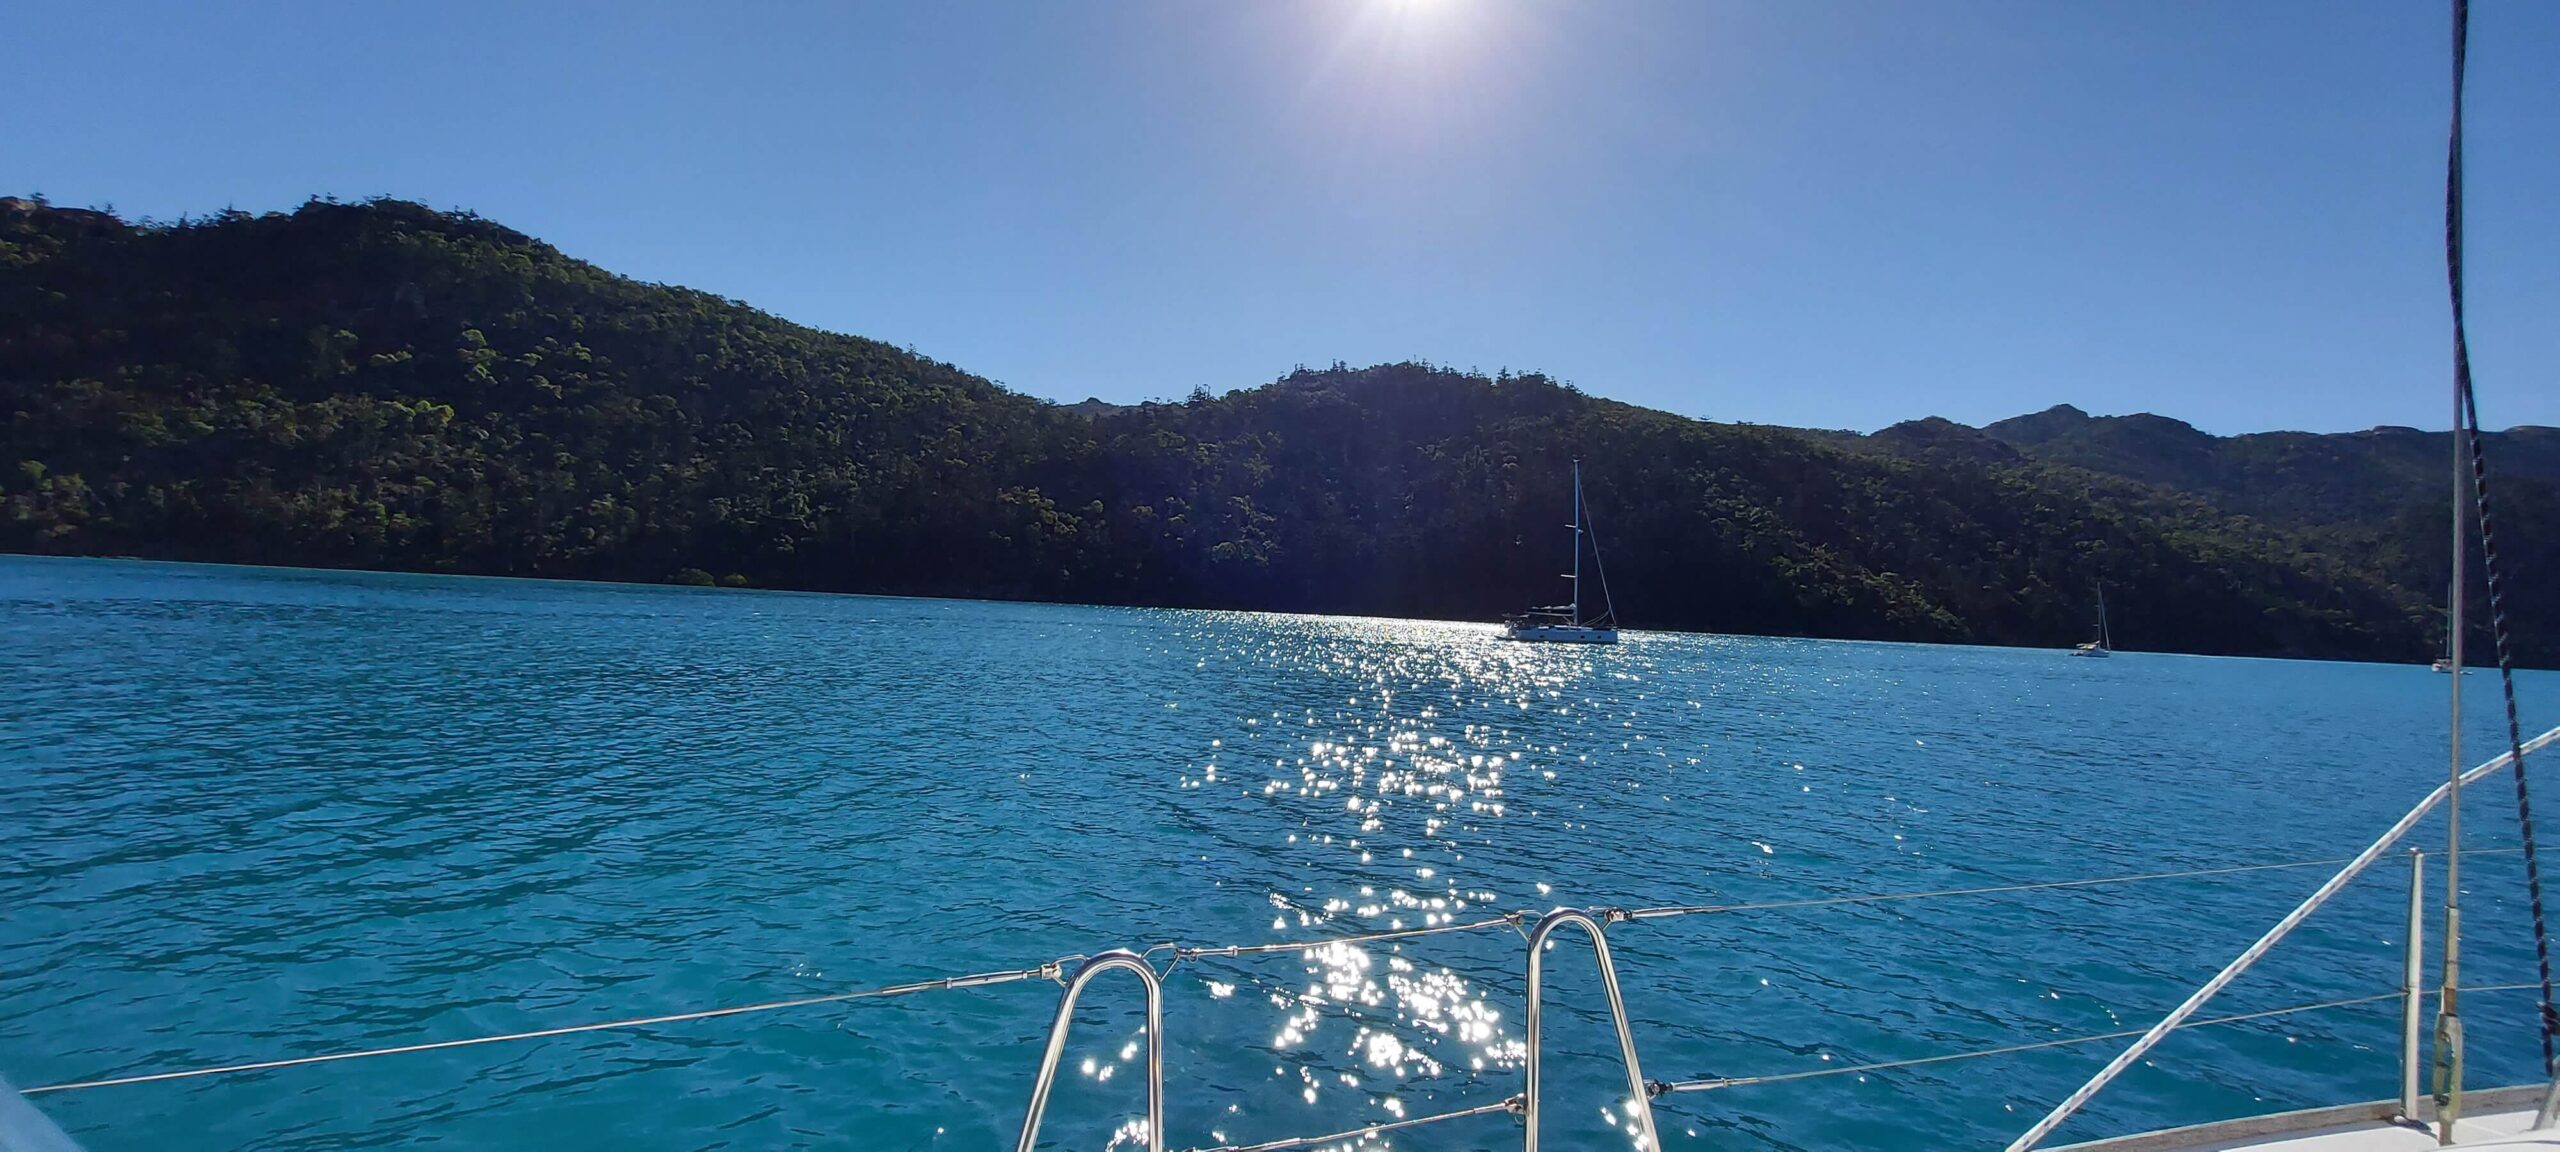 The Whitsundays view from our sailboat - Photo by Lizzie.